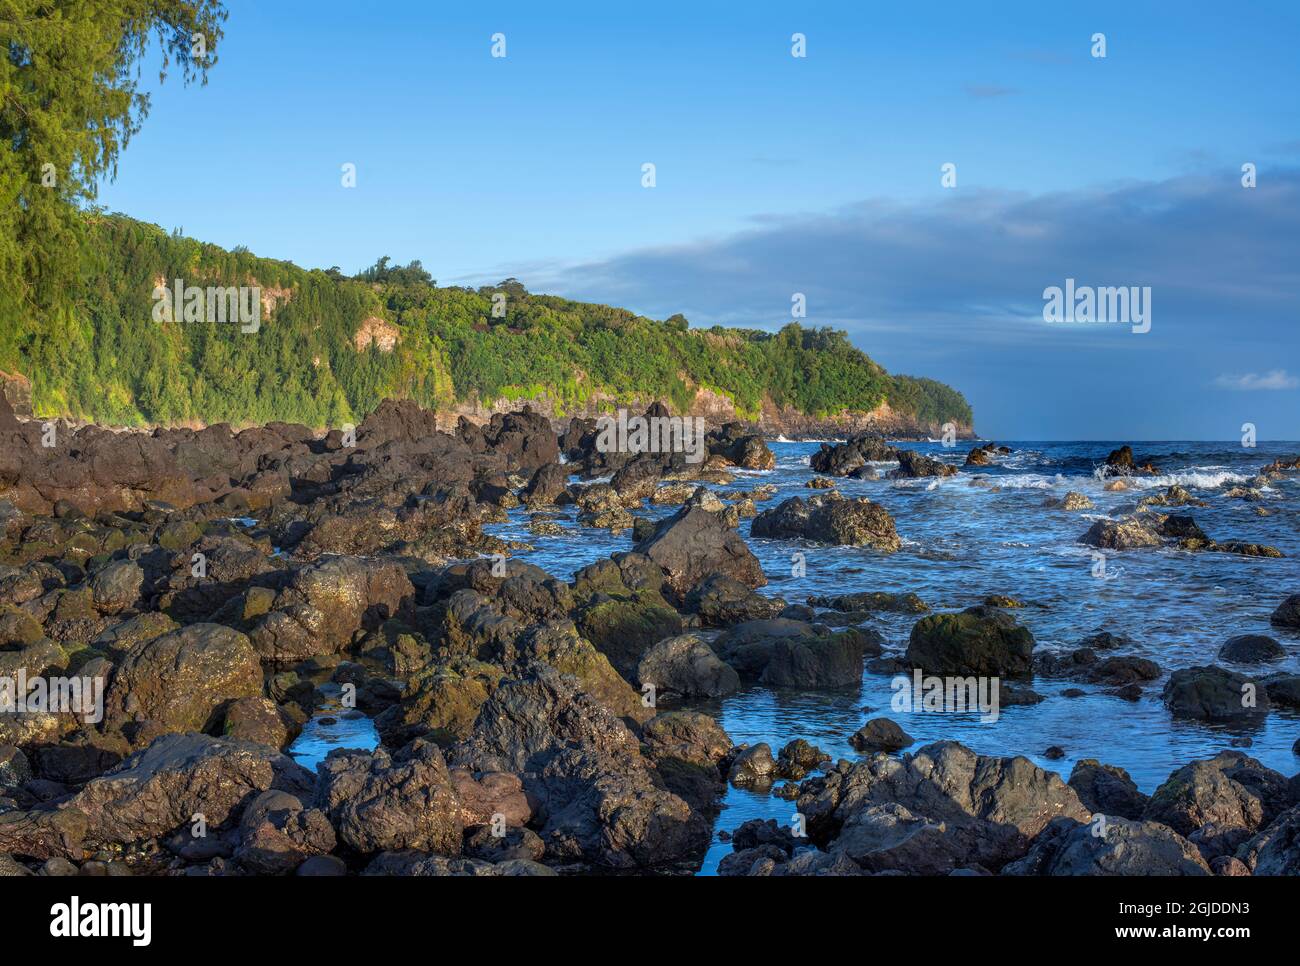 USA, Hawaii, Big Island of Hawaii. Laupahoehoe Point Beach Park, Sunrise on volcanic rock, incoming waves and distant forest. Stock Photo